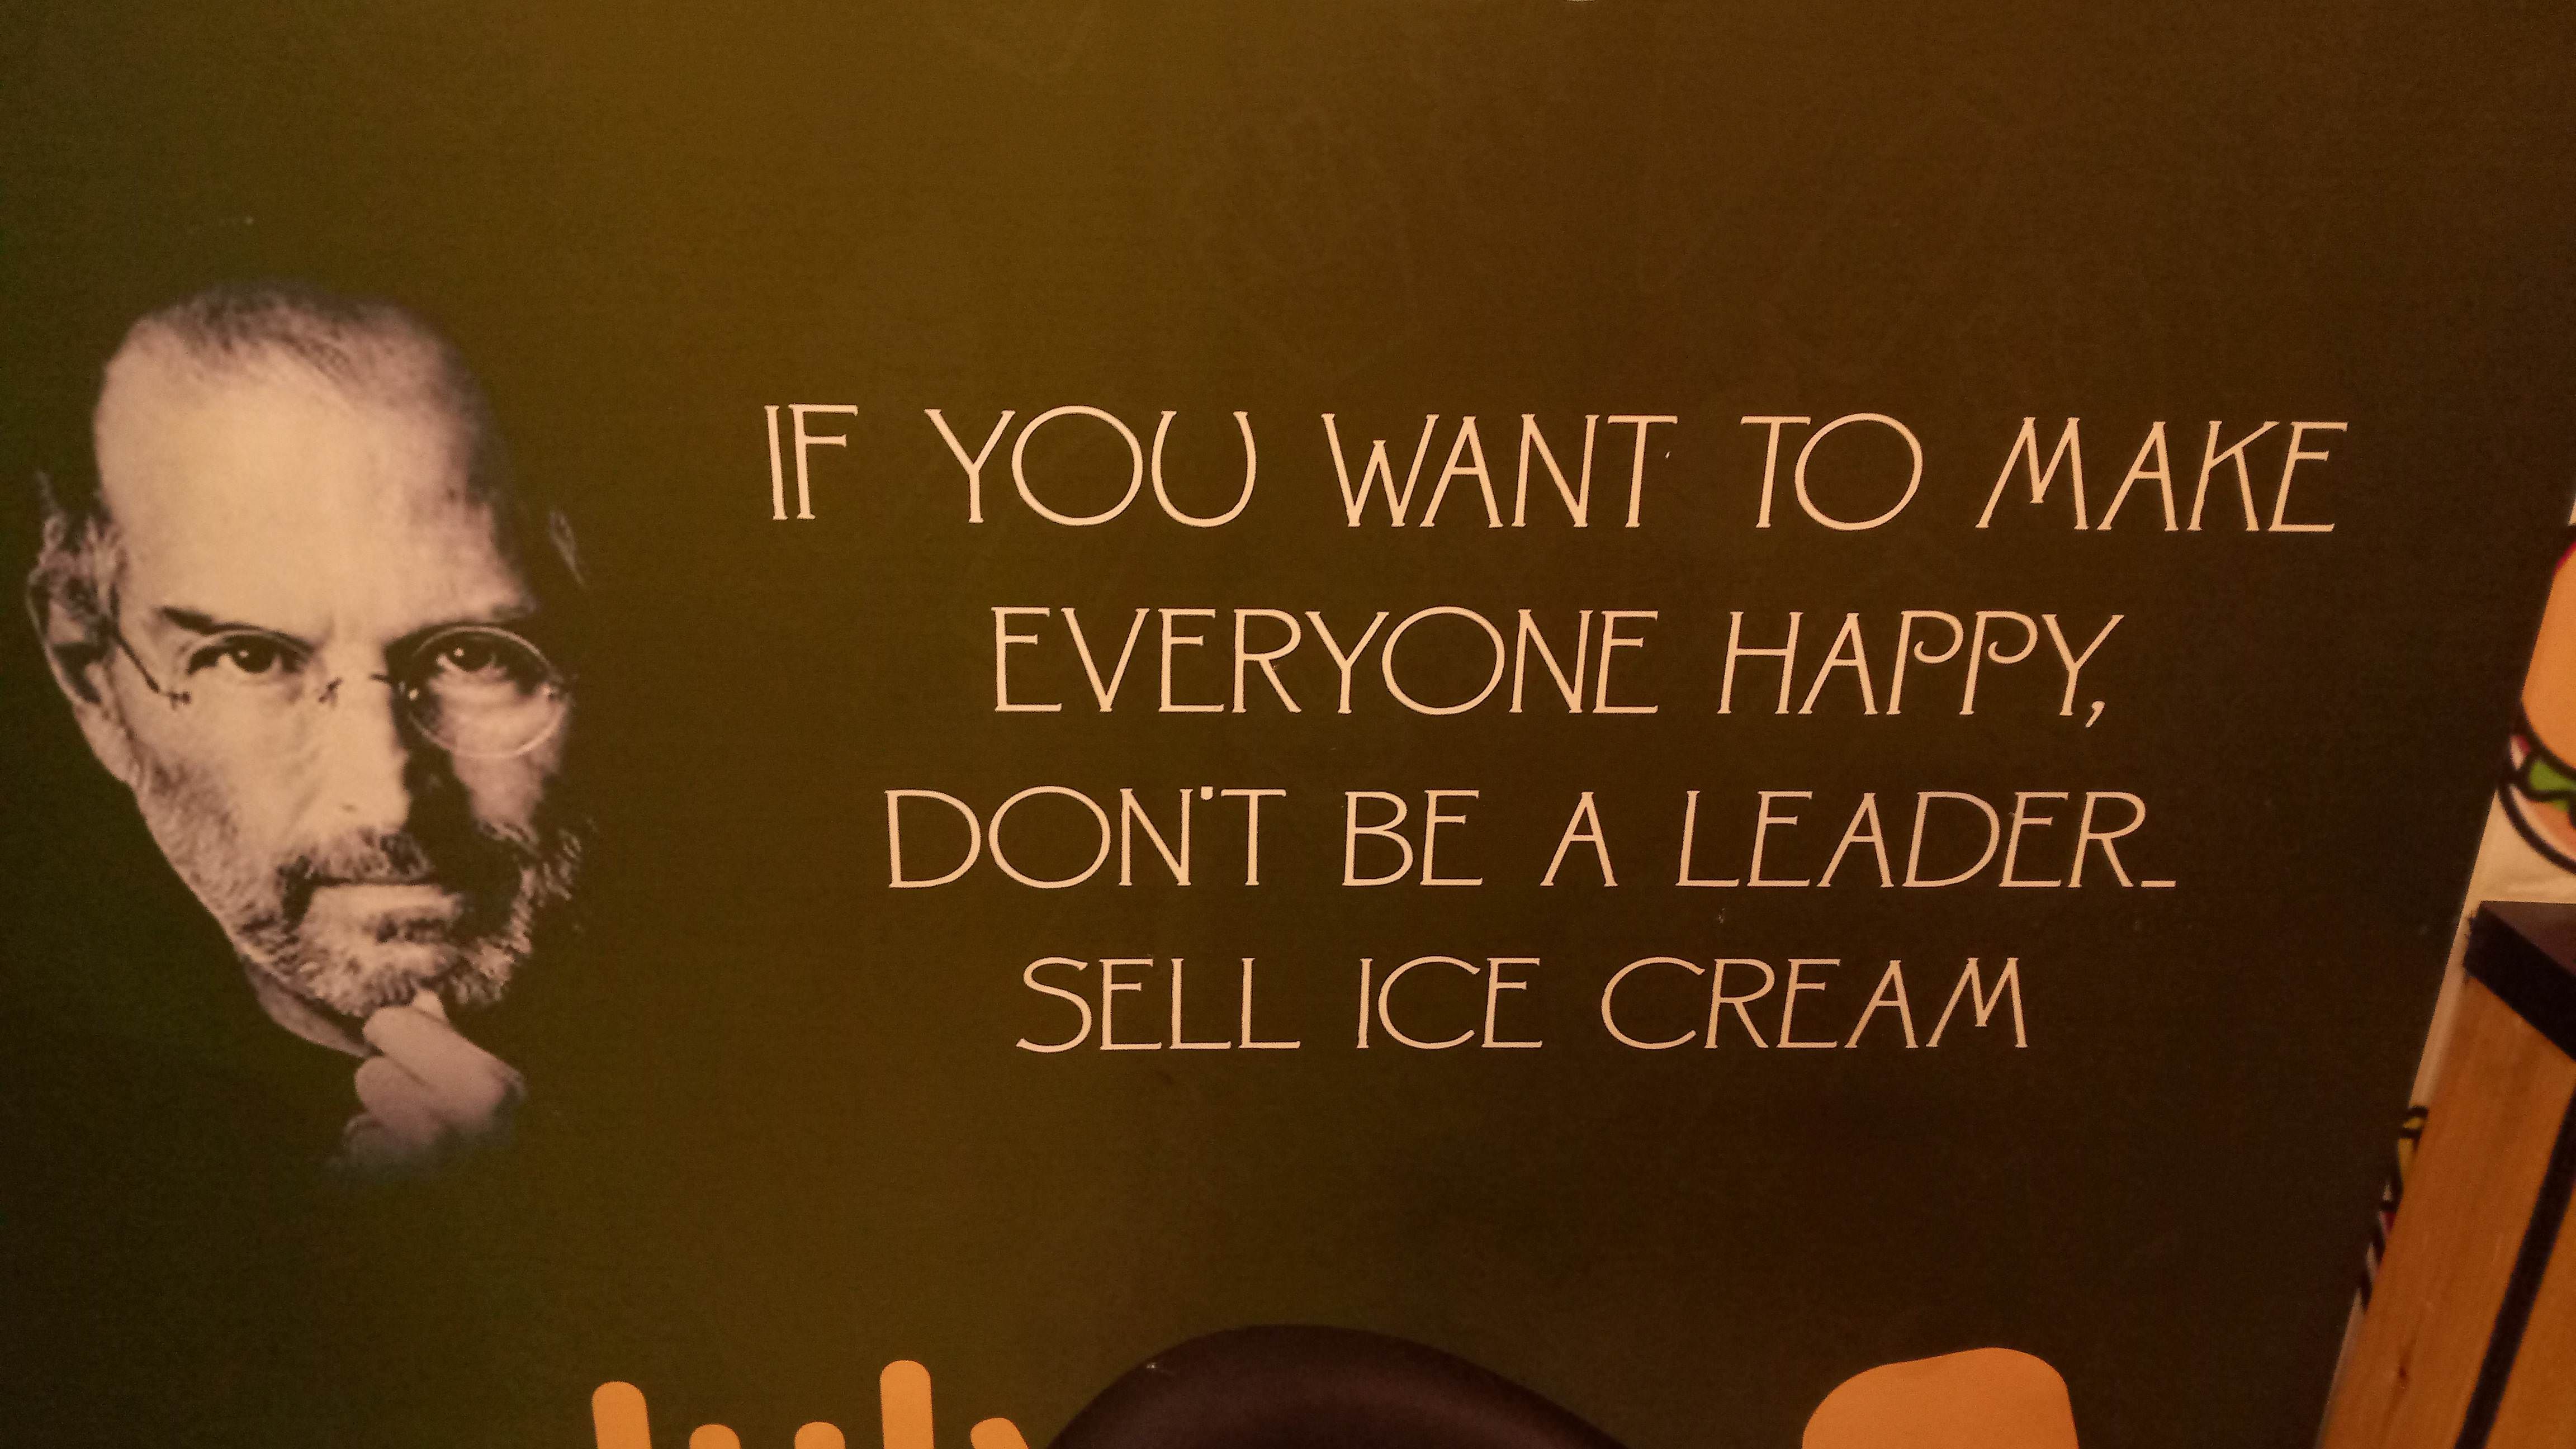 Found this at a local ice cream parlour in India.